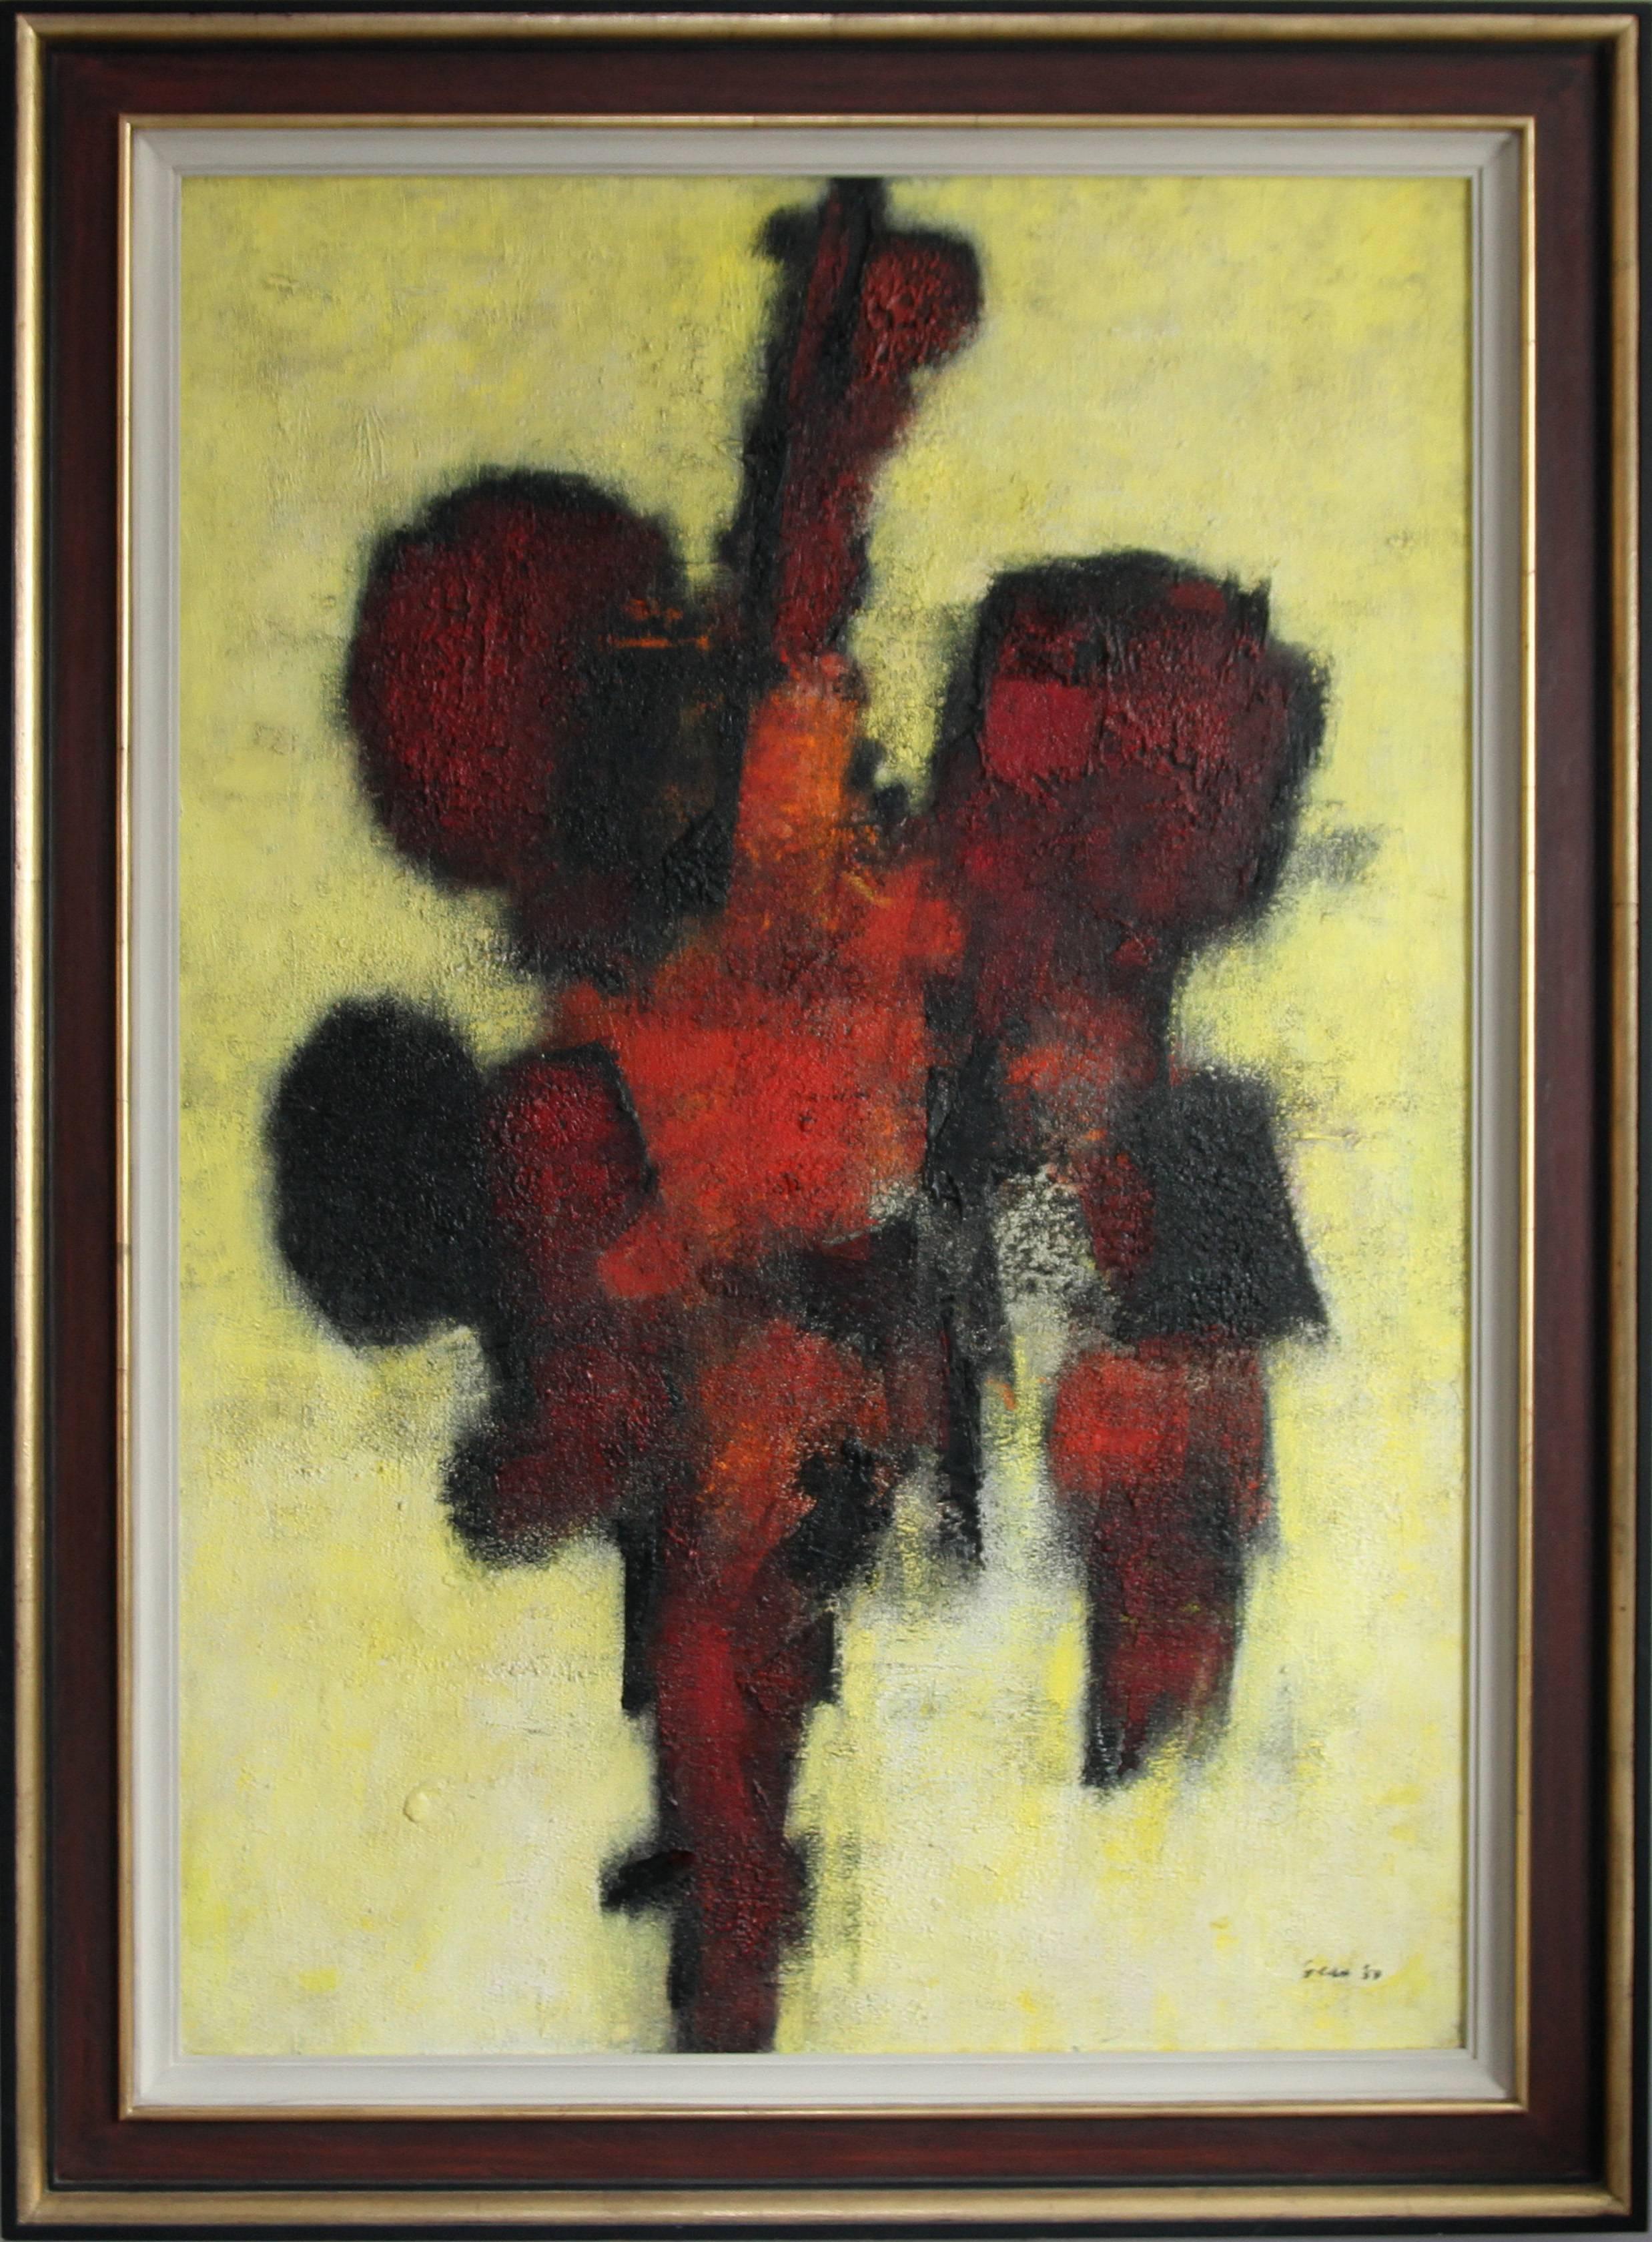 William Gear Abstract Painting - Red Idol - British 50's art abstract oil painting - Modernist COBRA - provenance